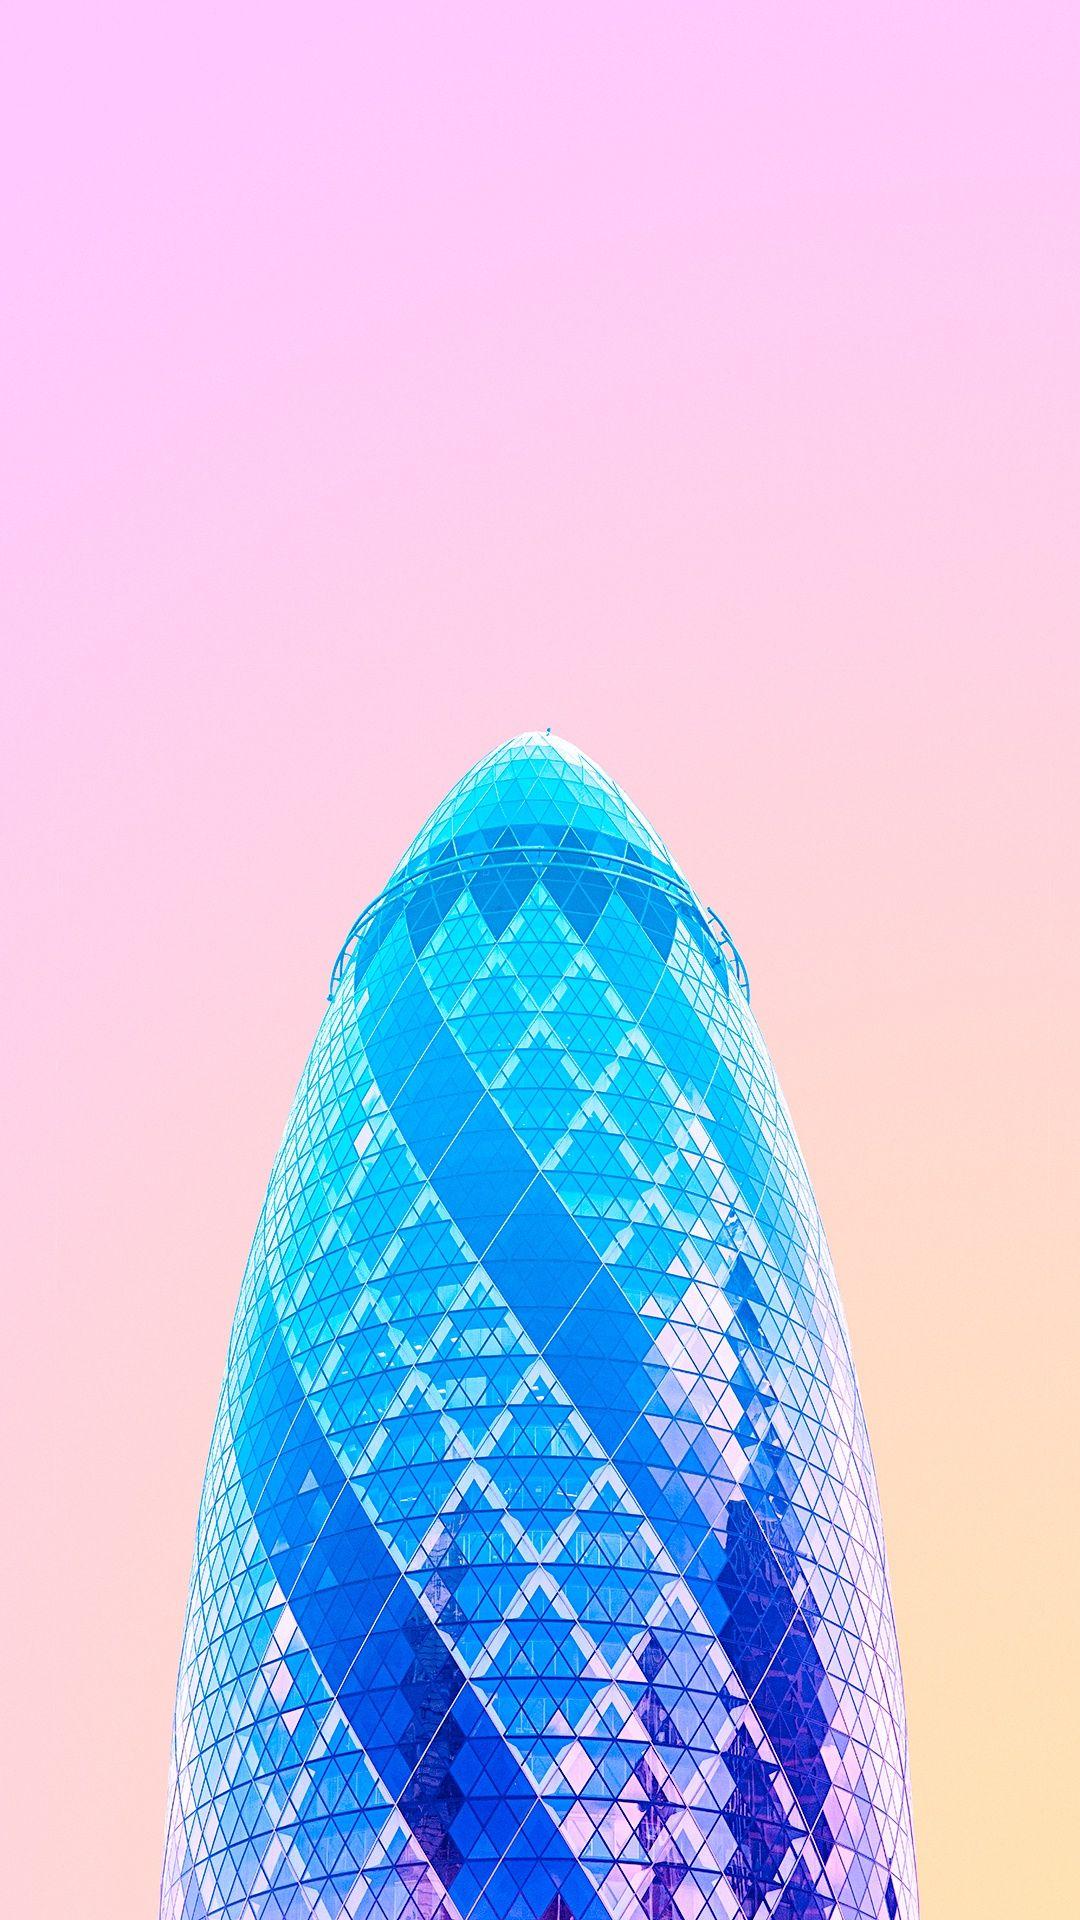 The Gherkin 30 St Mary Axe Colorful iPhone 6 Plus HD Wallpaper HD